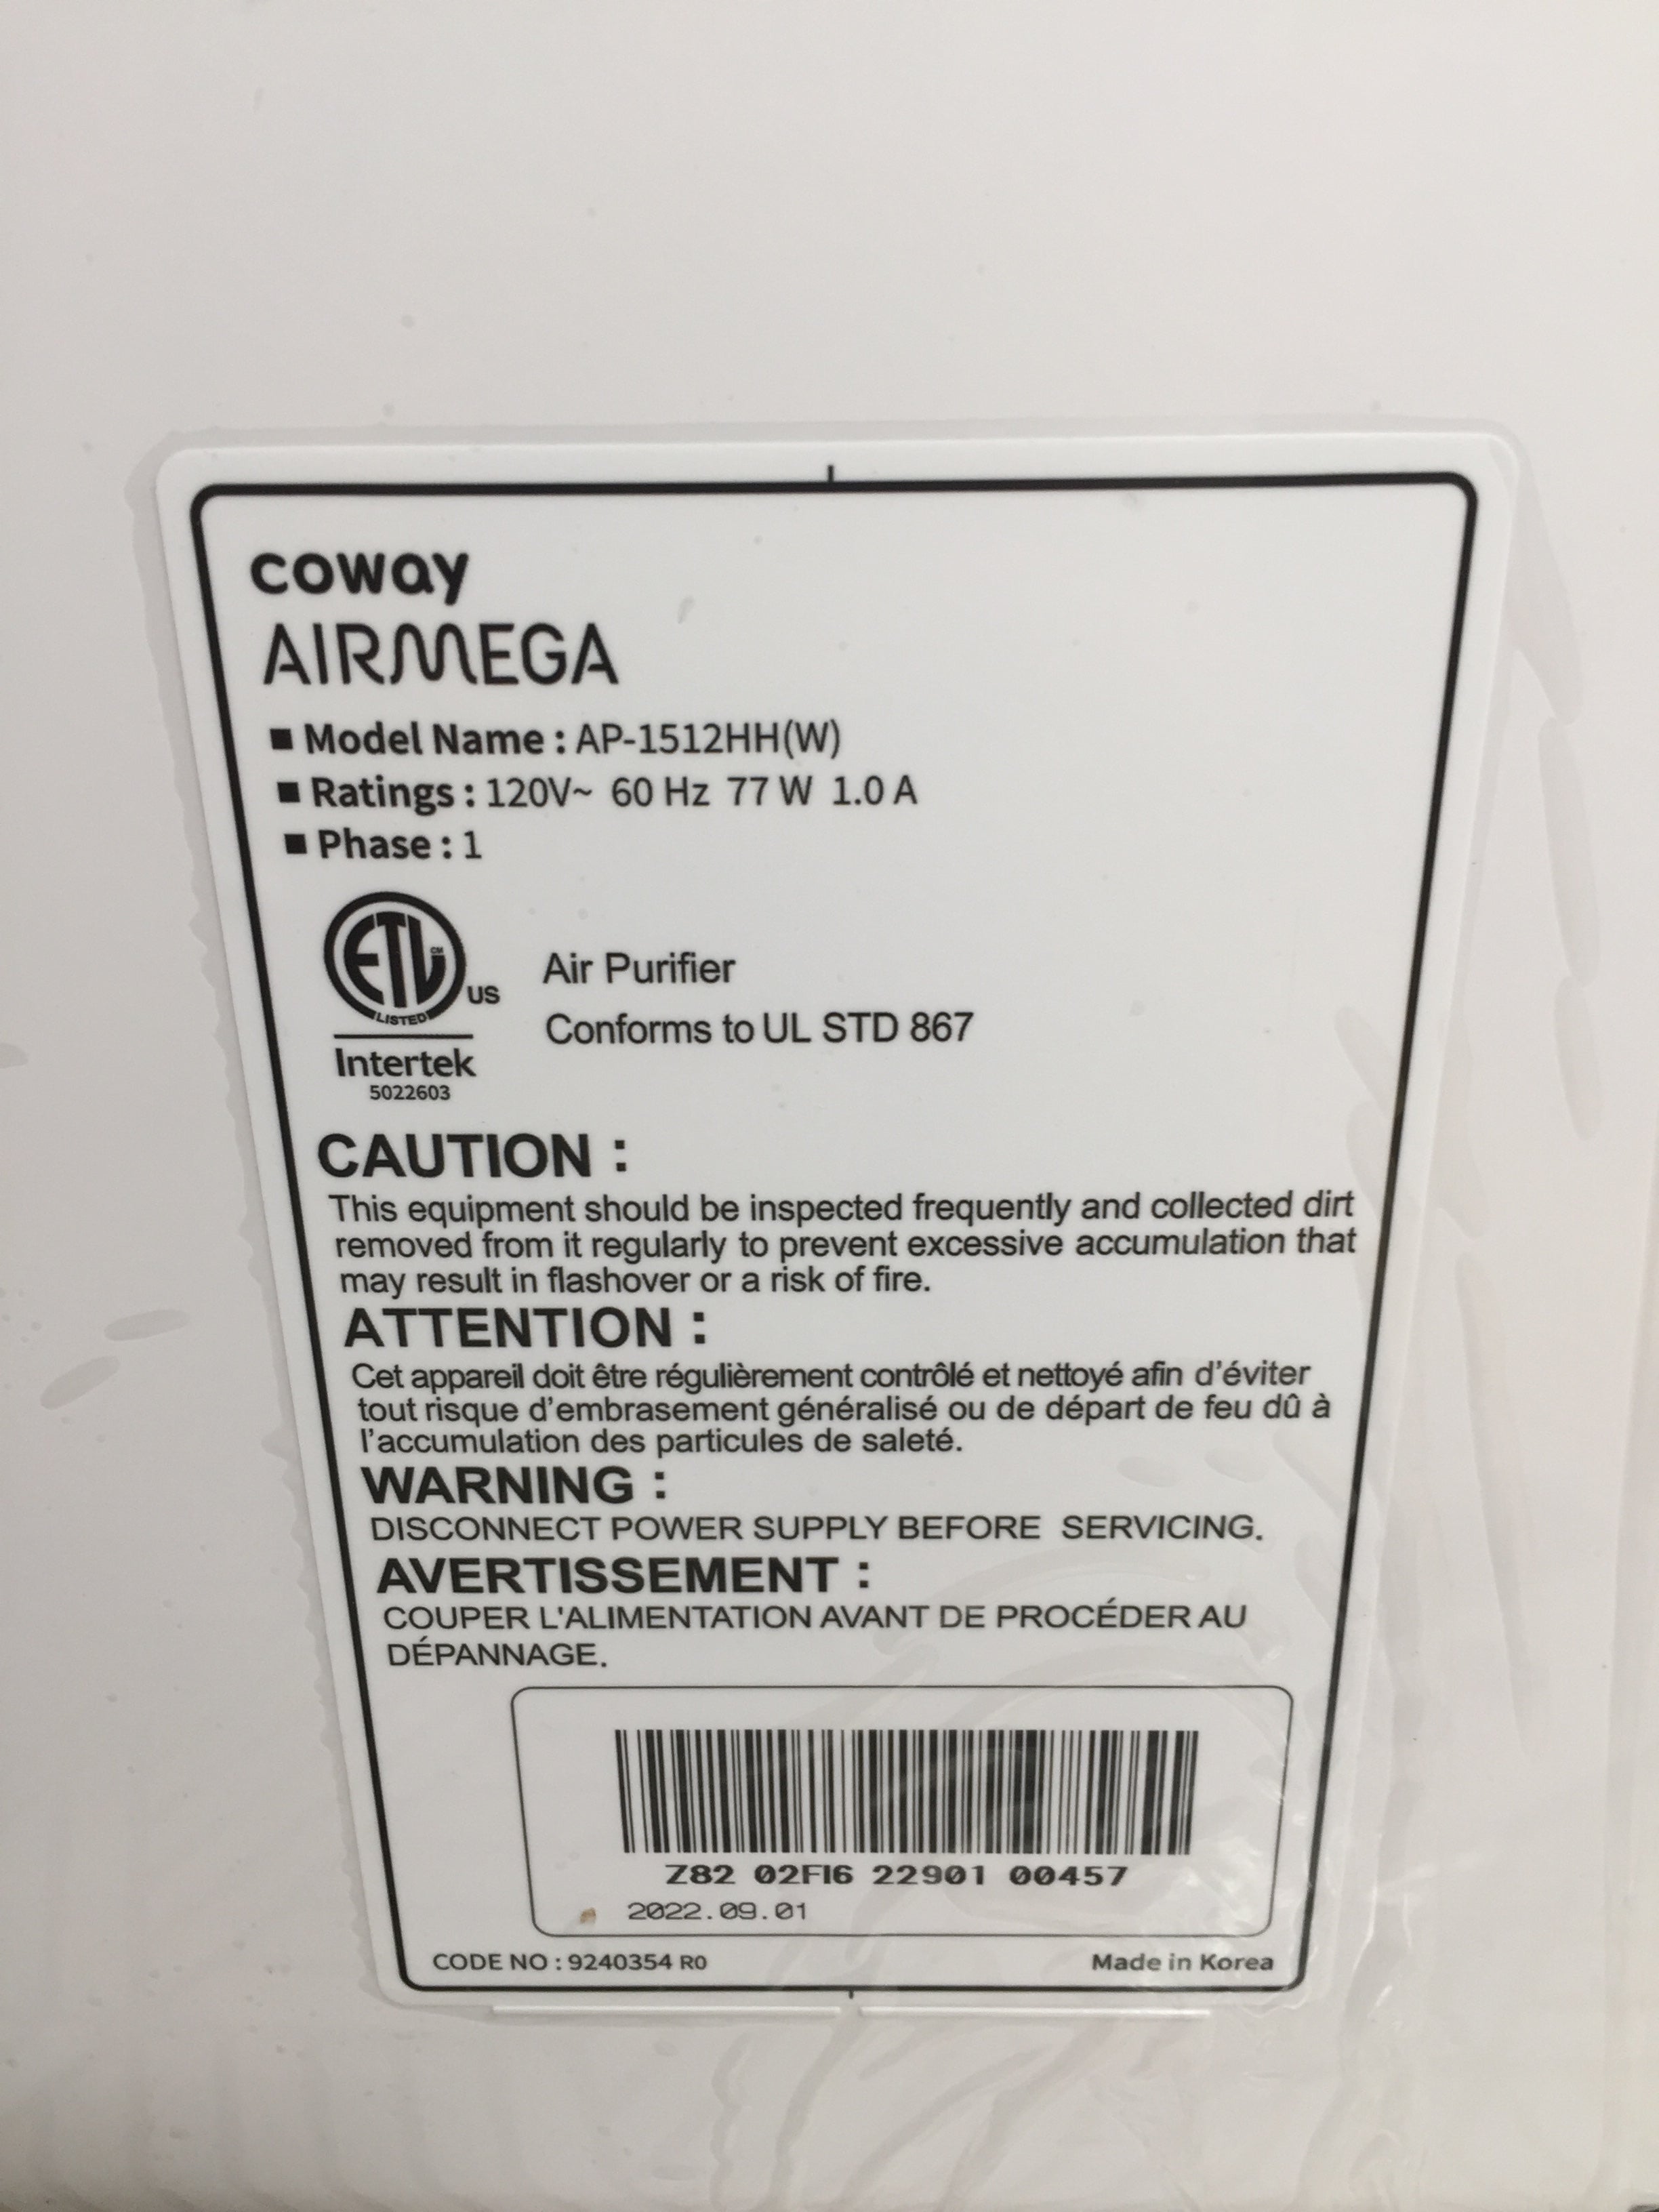 Coway Airmega AP-1512HH(W) True HEPA Purifier with Air Quality Monitoring *NEW* (8068950655214)